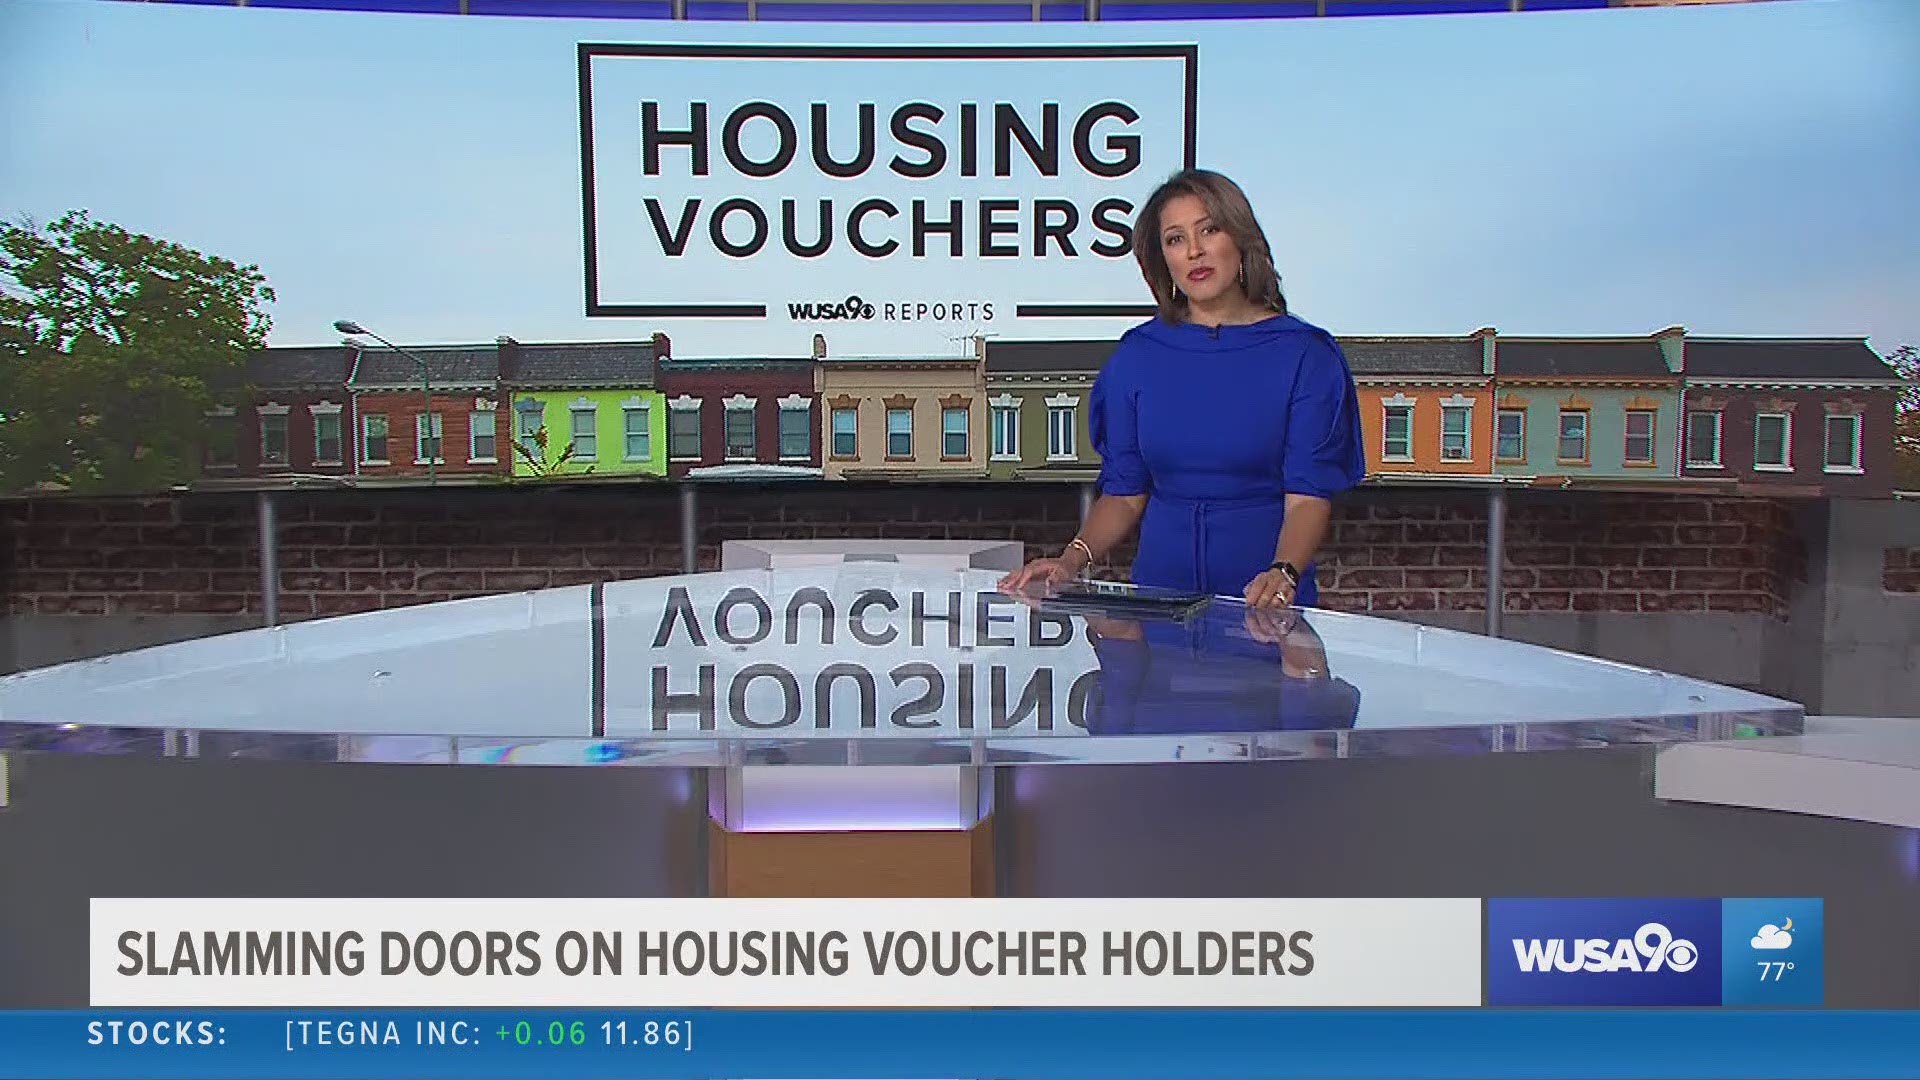 Housing vouchers, formerly called "Section 8 vouchers," are one of the most common ways tax dollars help lower-income Americans avoid homelessness.